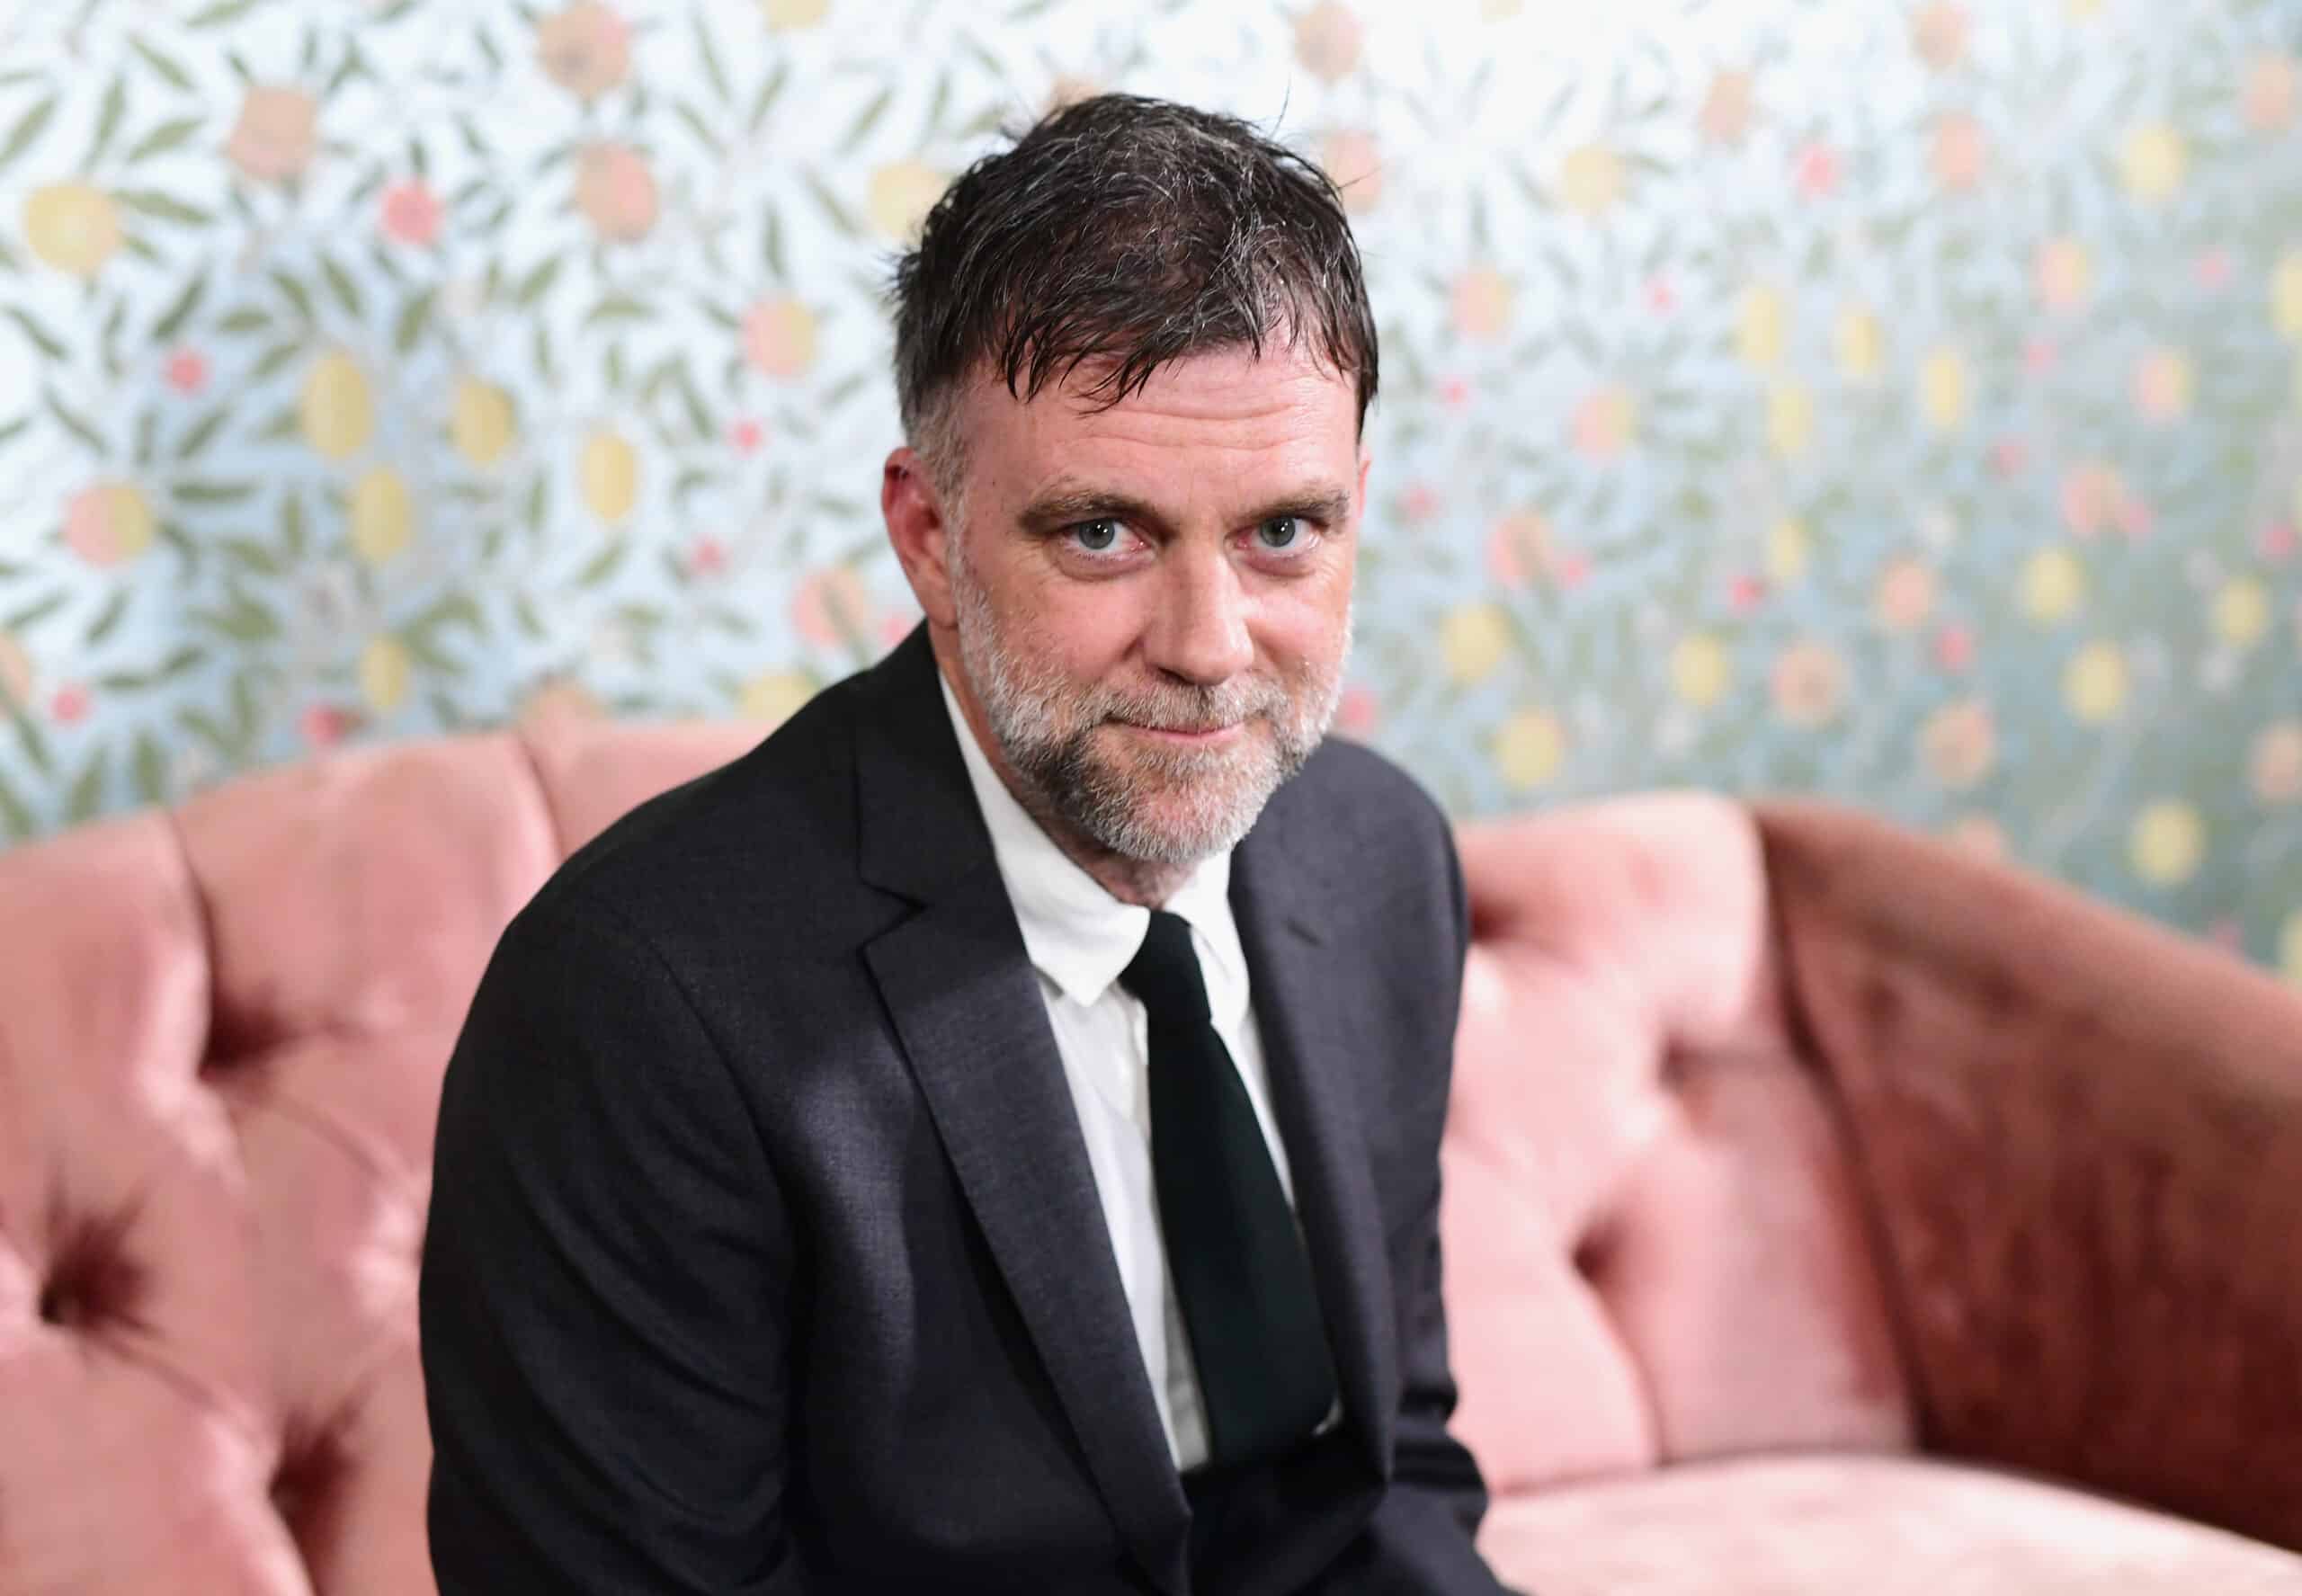 Vanity Fair And Focus Features Celebrate The Film "Phantom Thread" with Paul Thomas Anderson at the Chateau Marmont